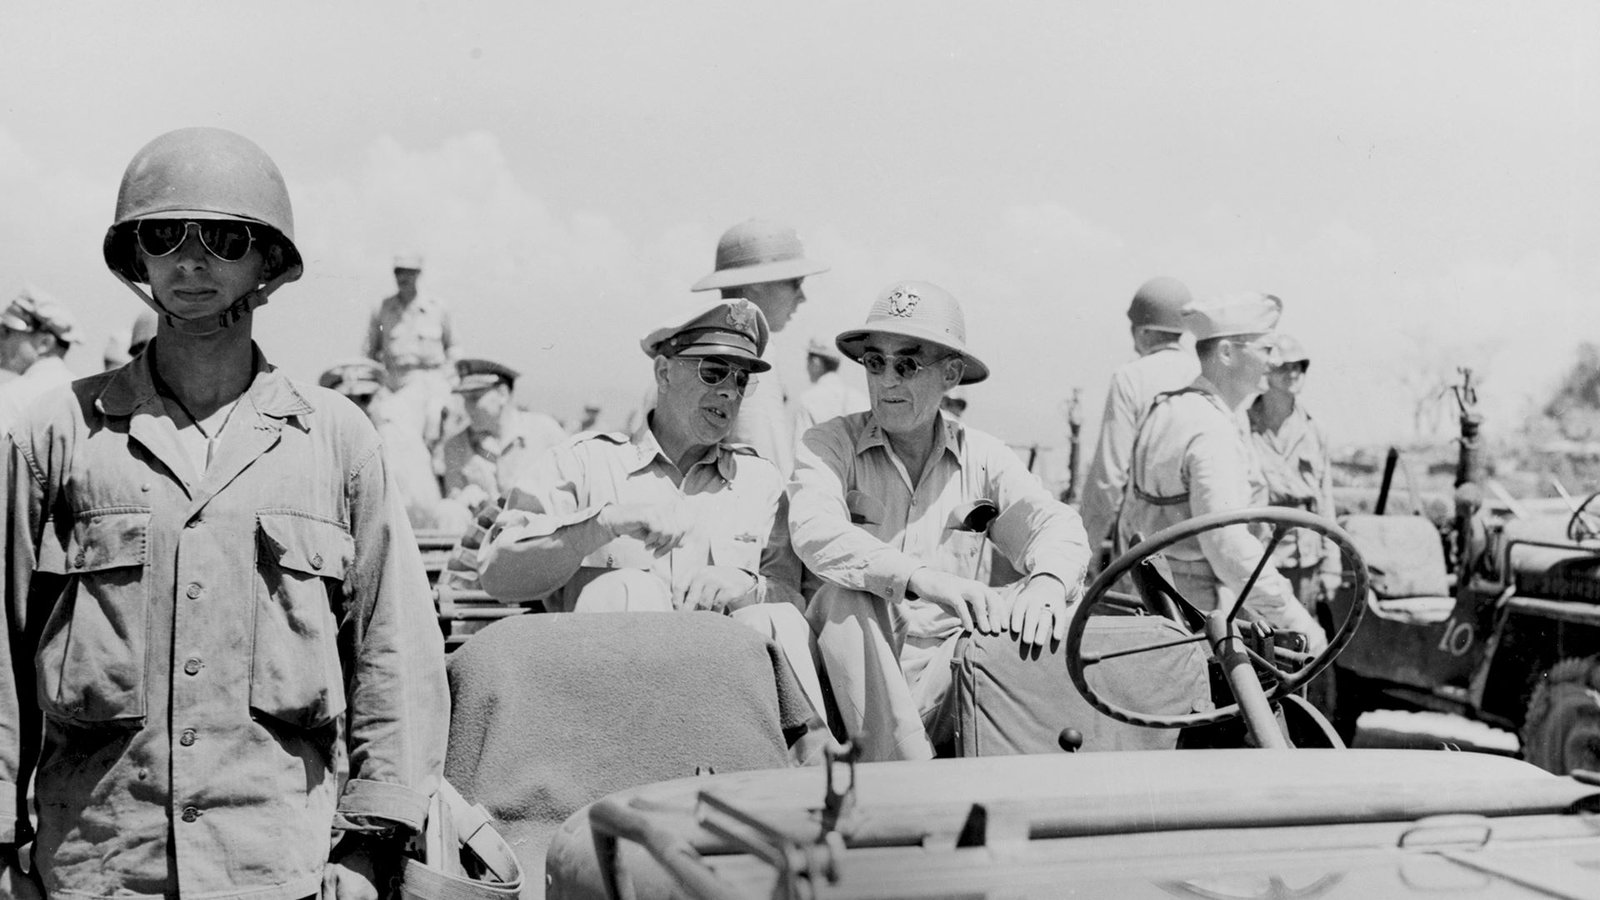 MacArthur Returns to the Philippines